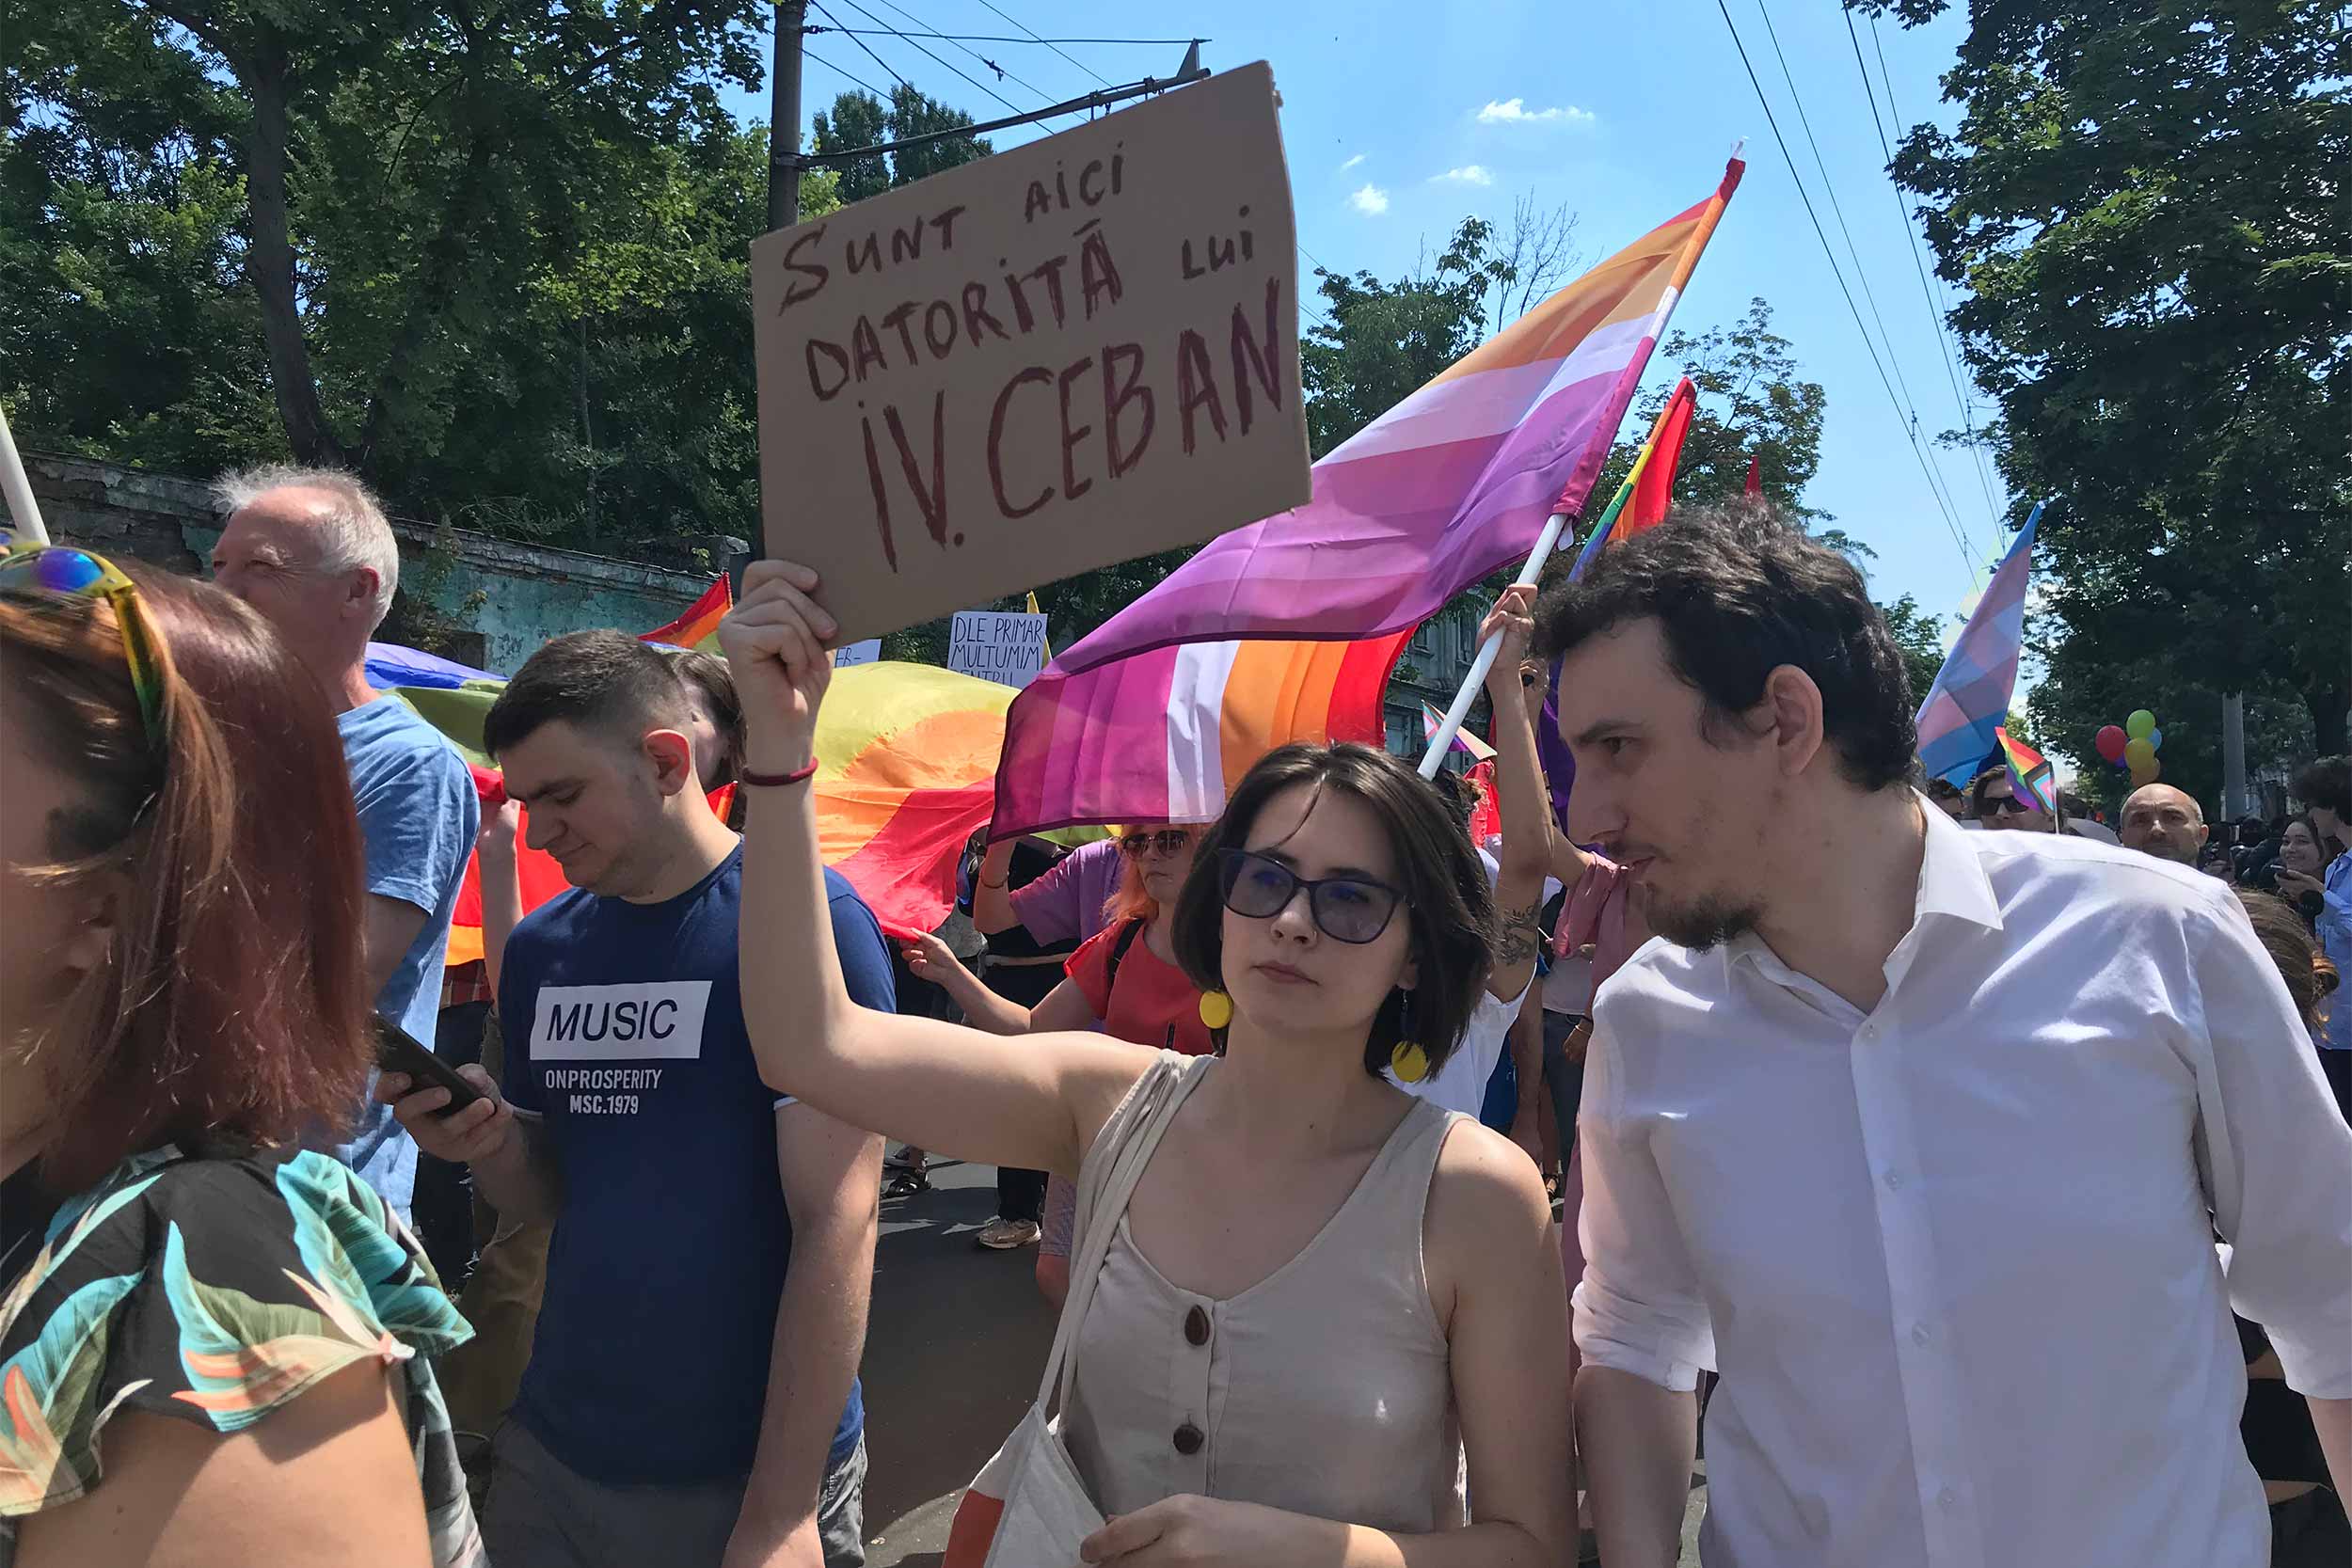 A woman holds a sign, which reads "I am here because of Ion Ceban." Ceban is the mayor of Moldova's capital Chisinau, whose threats to ban the Pride march to go ahead, prompted several people to attend in support of the organisers and the LGBT+ community. © Aliona Ciurca